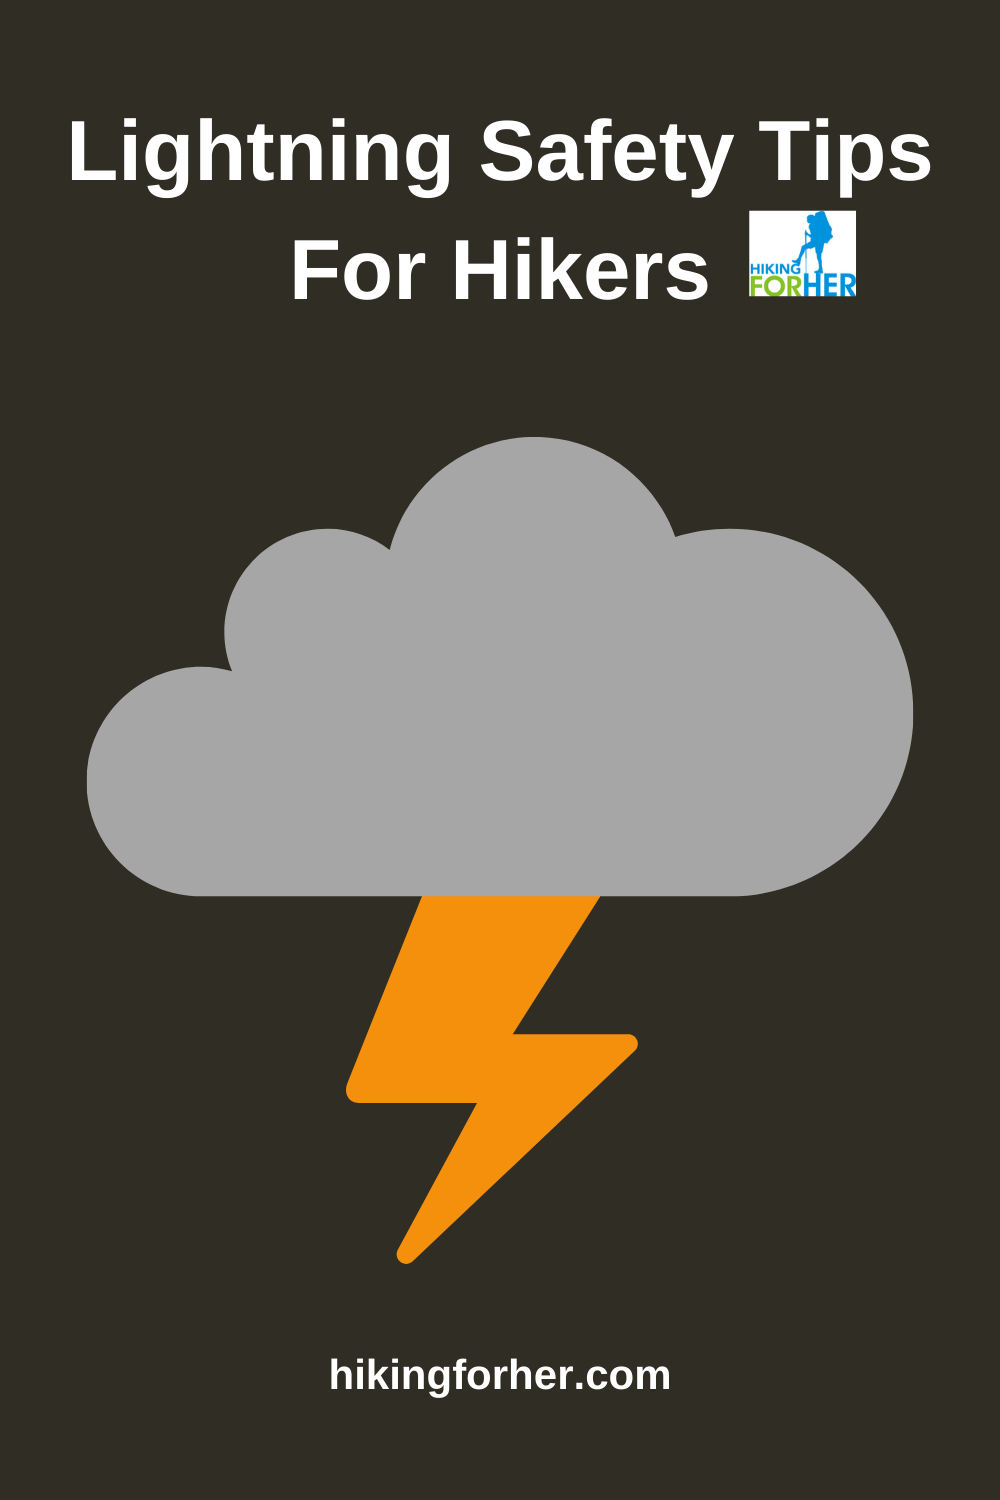 Lightning safety tips for hikers and campers #lightningsafety #hikingsafety #campingsafety #lightningtips #hikingforher